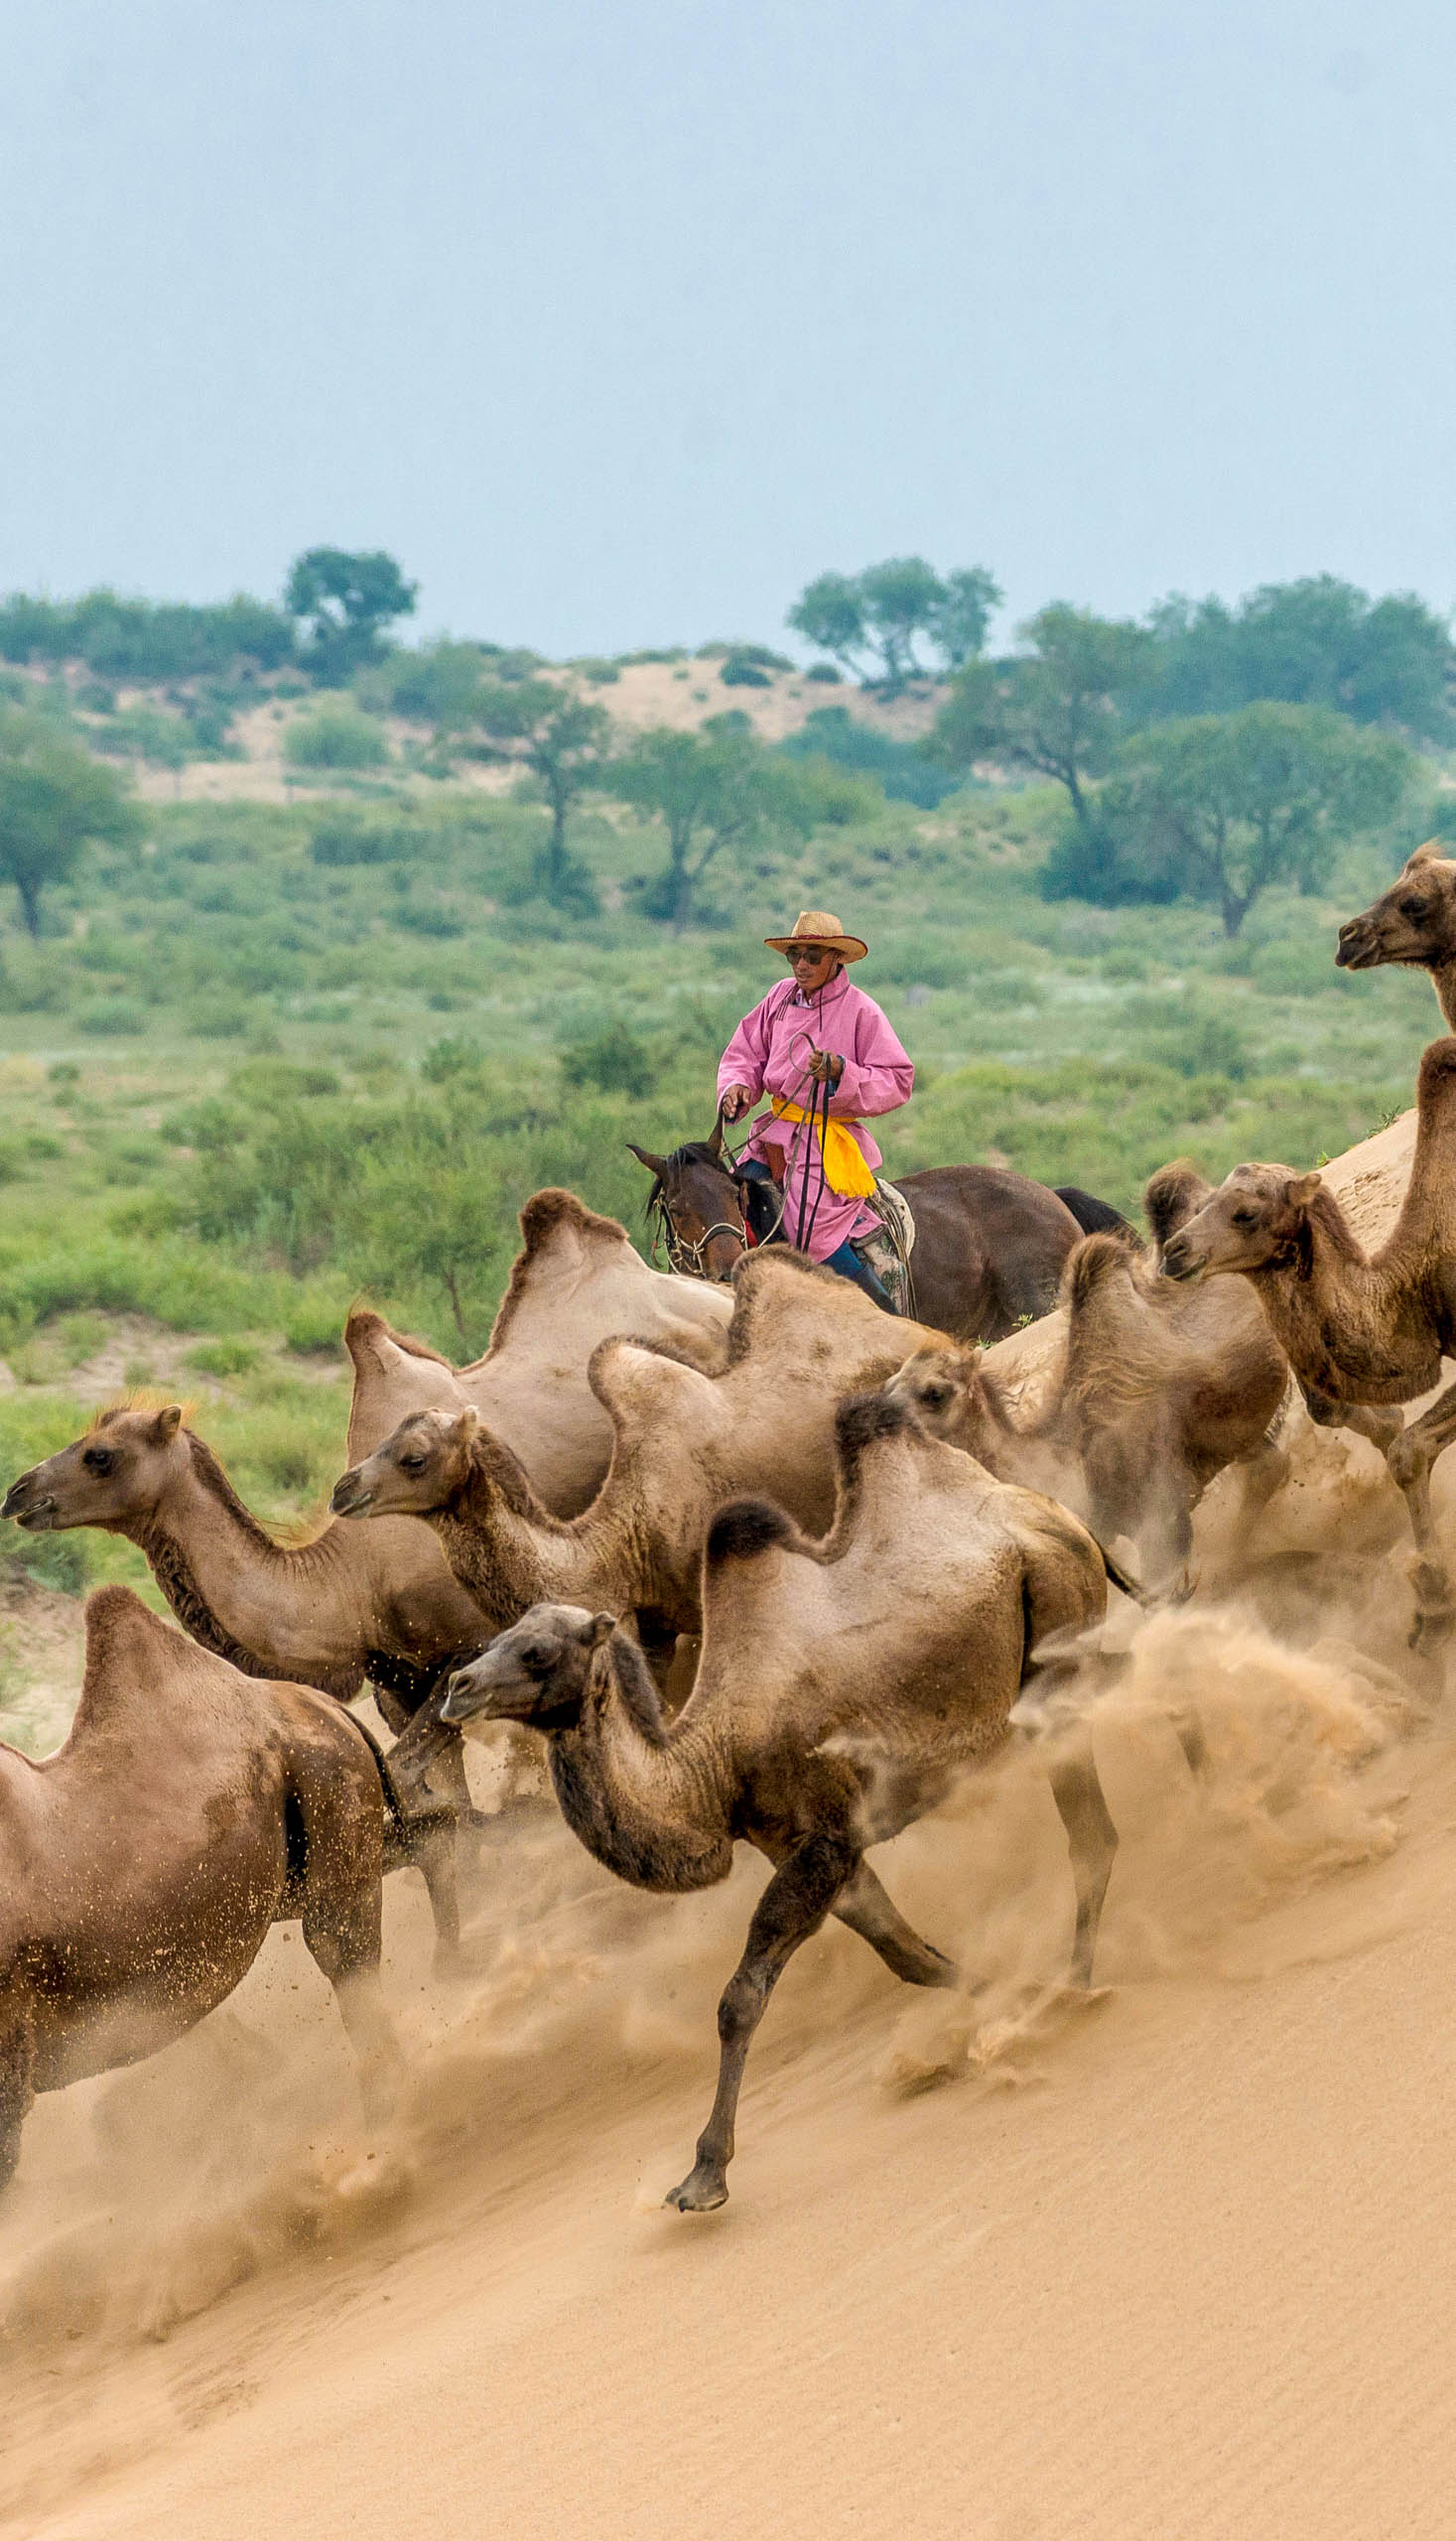 Domesticated camels are herded down sand dunes in Mongolia.